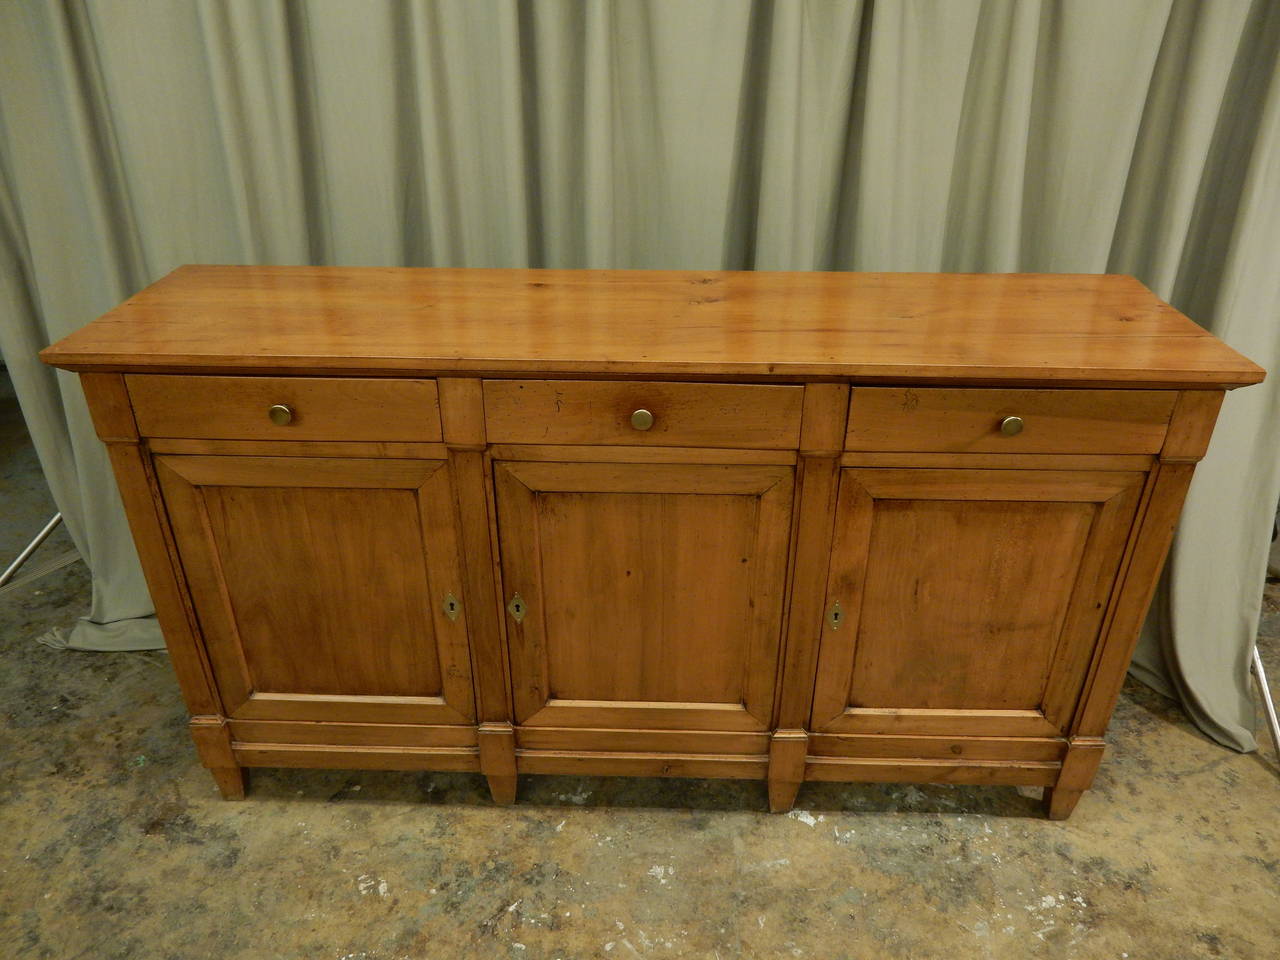 Very nice 19th century French Directoire style fruitwood three-drawer and three-door enfilade.